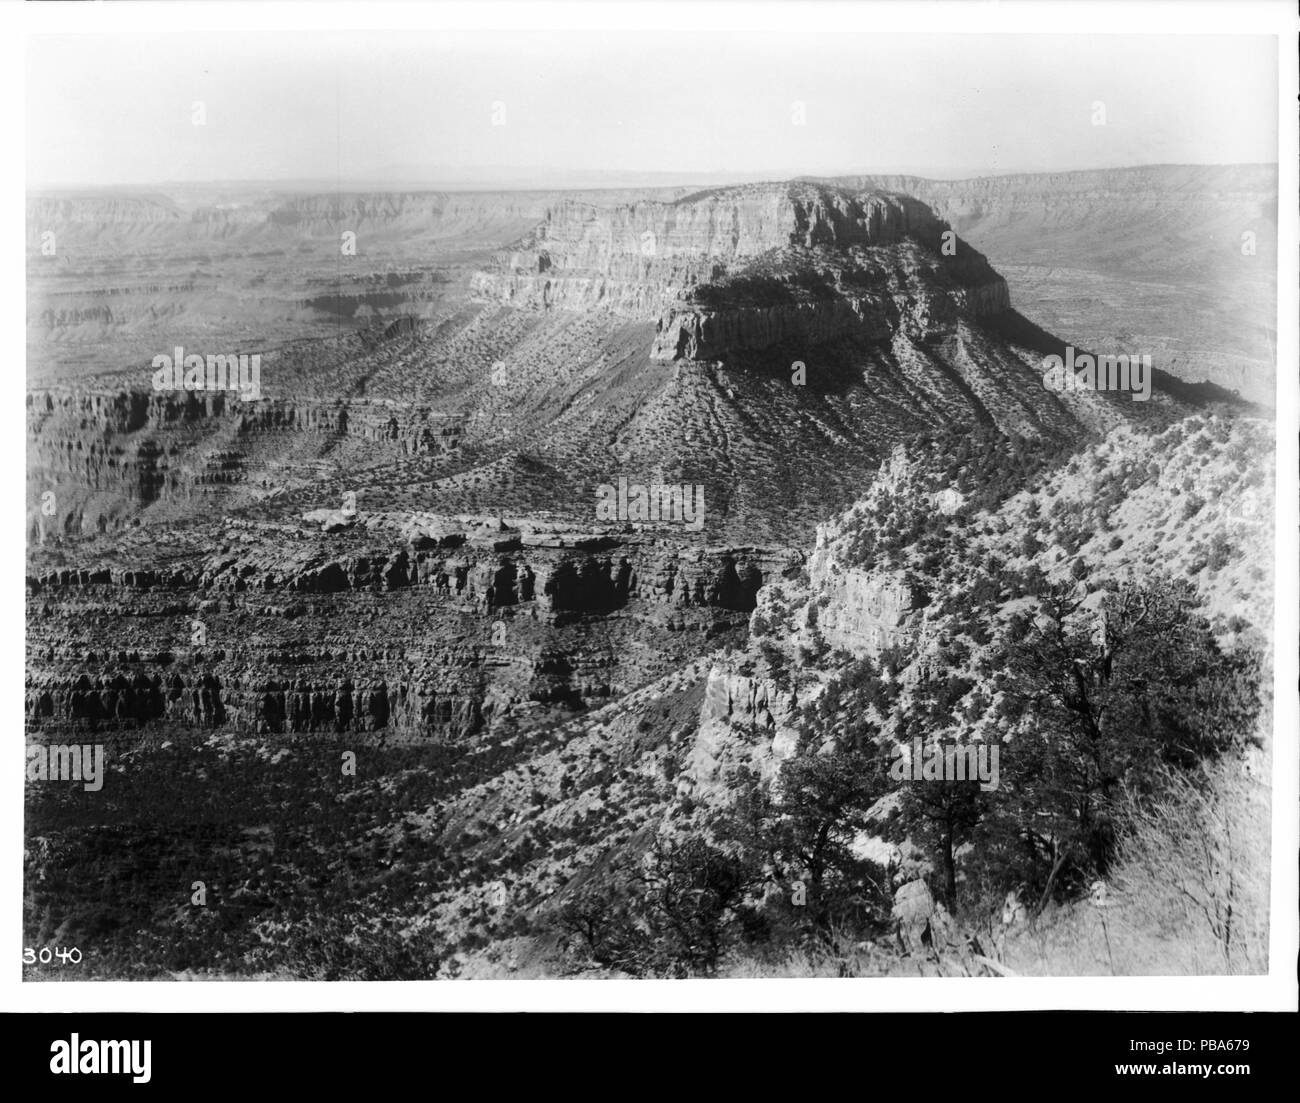 . English: Mountain north of Powells Plateau, north rim of the Grand Canyon, from the west side, ca.1900-1930 Photograph of the mountain north of Powells Plateau, north rim of the Grand Canyon, from the west side, ca.1900-1930. The mountain sticks up out of the middle of the canyon. Trees dot the rocky slopes in the foreground near the canyon's rim and around the based of the mountain. The far rim is visible in the distance.  Call number: CHS-3040 Photographer: Pierce, C.C. (Charles C.), 1861-1946 Filename: CHS-3040 Coverage date: 1900/1930 Part of collection: California Historical Society Col Stock Photo